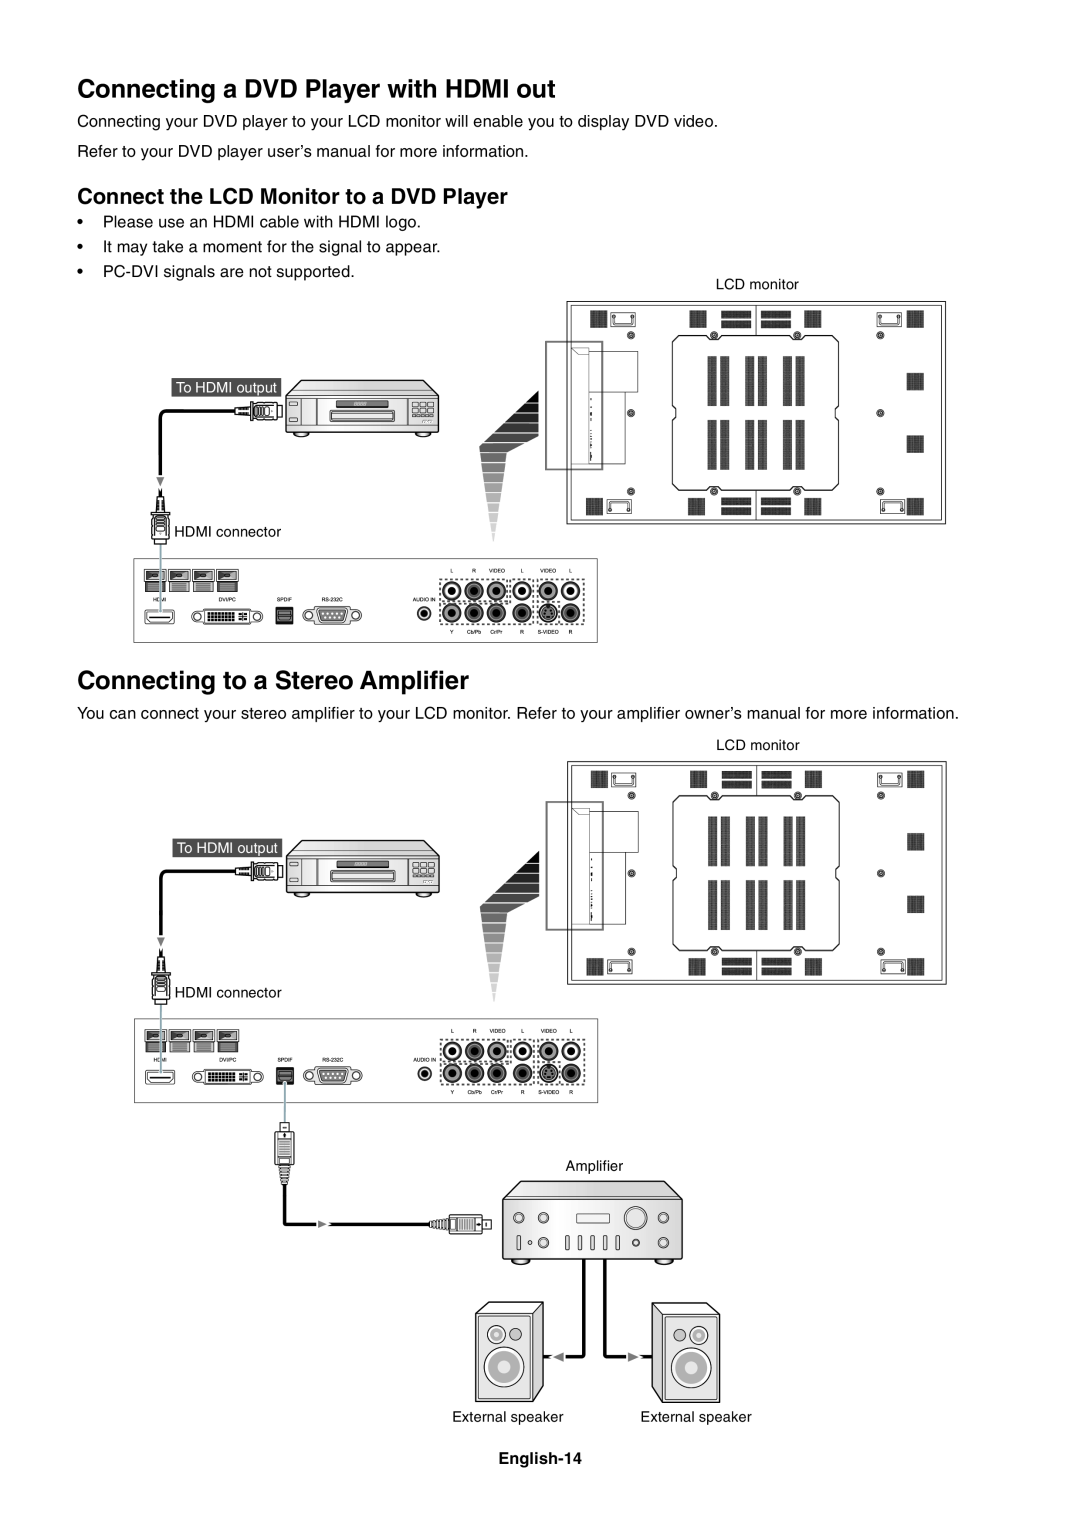 NEC LCD8205-P user manual Connecting a DVD Player with HDMI out, Connecting to a Stereo Amplifier, English-14 